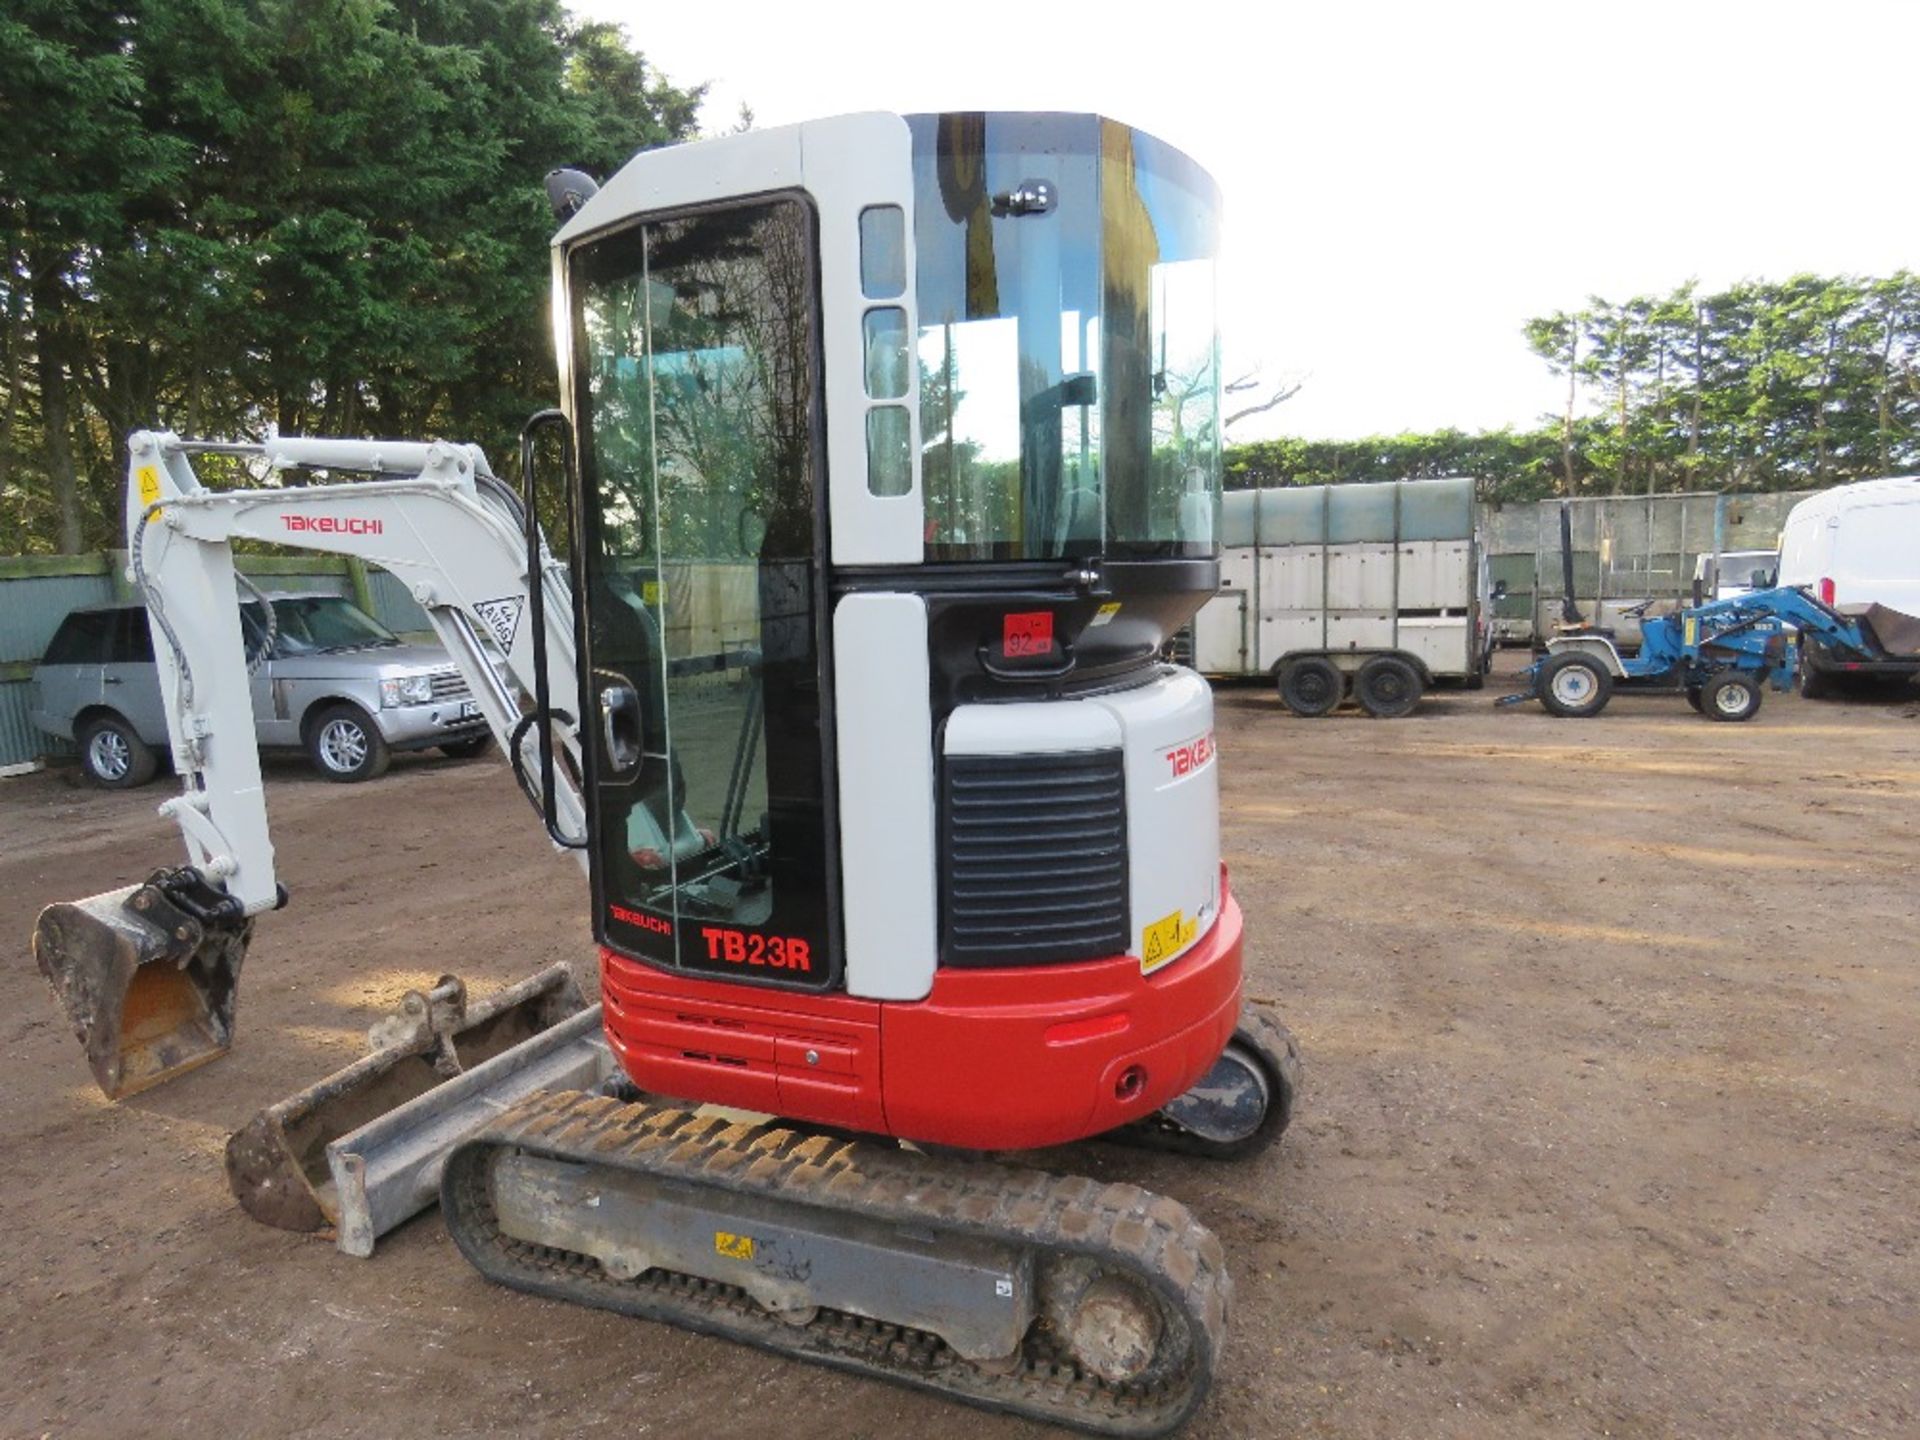 TAKEUCHI TB23R ZERO SWING EXCAVATOR, YEAR 2019. 1243 REC HOURS. 2 X BUCKETS. 2670KG OPERATING WEIGHT - Image 5 of 10